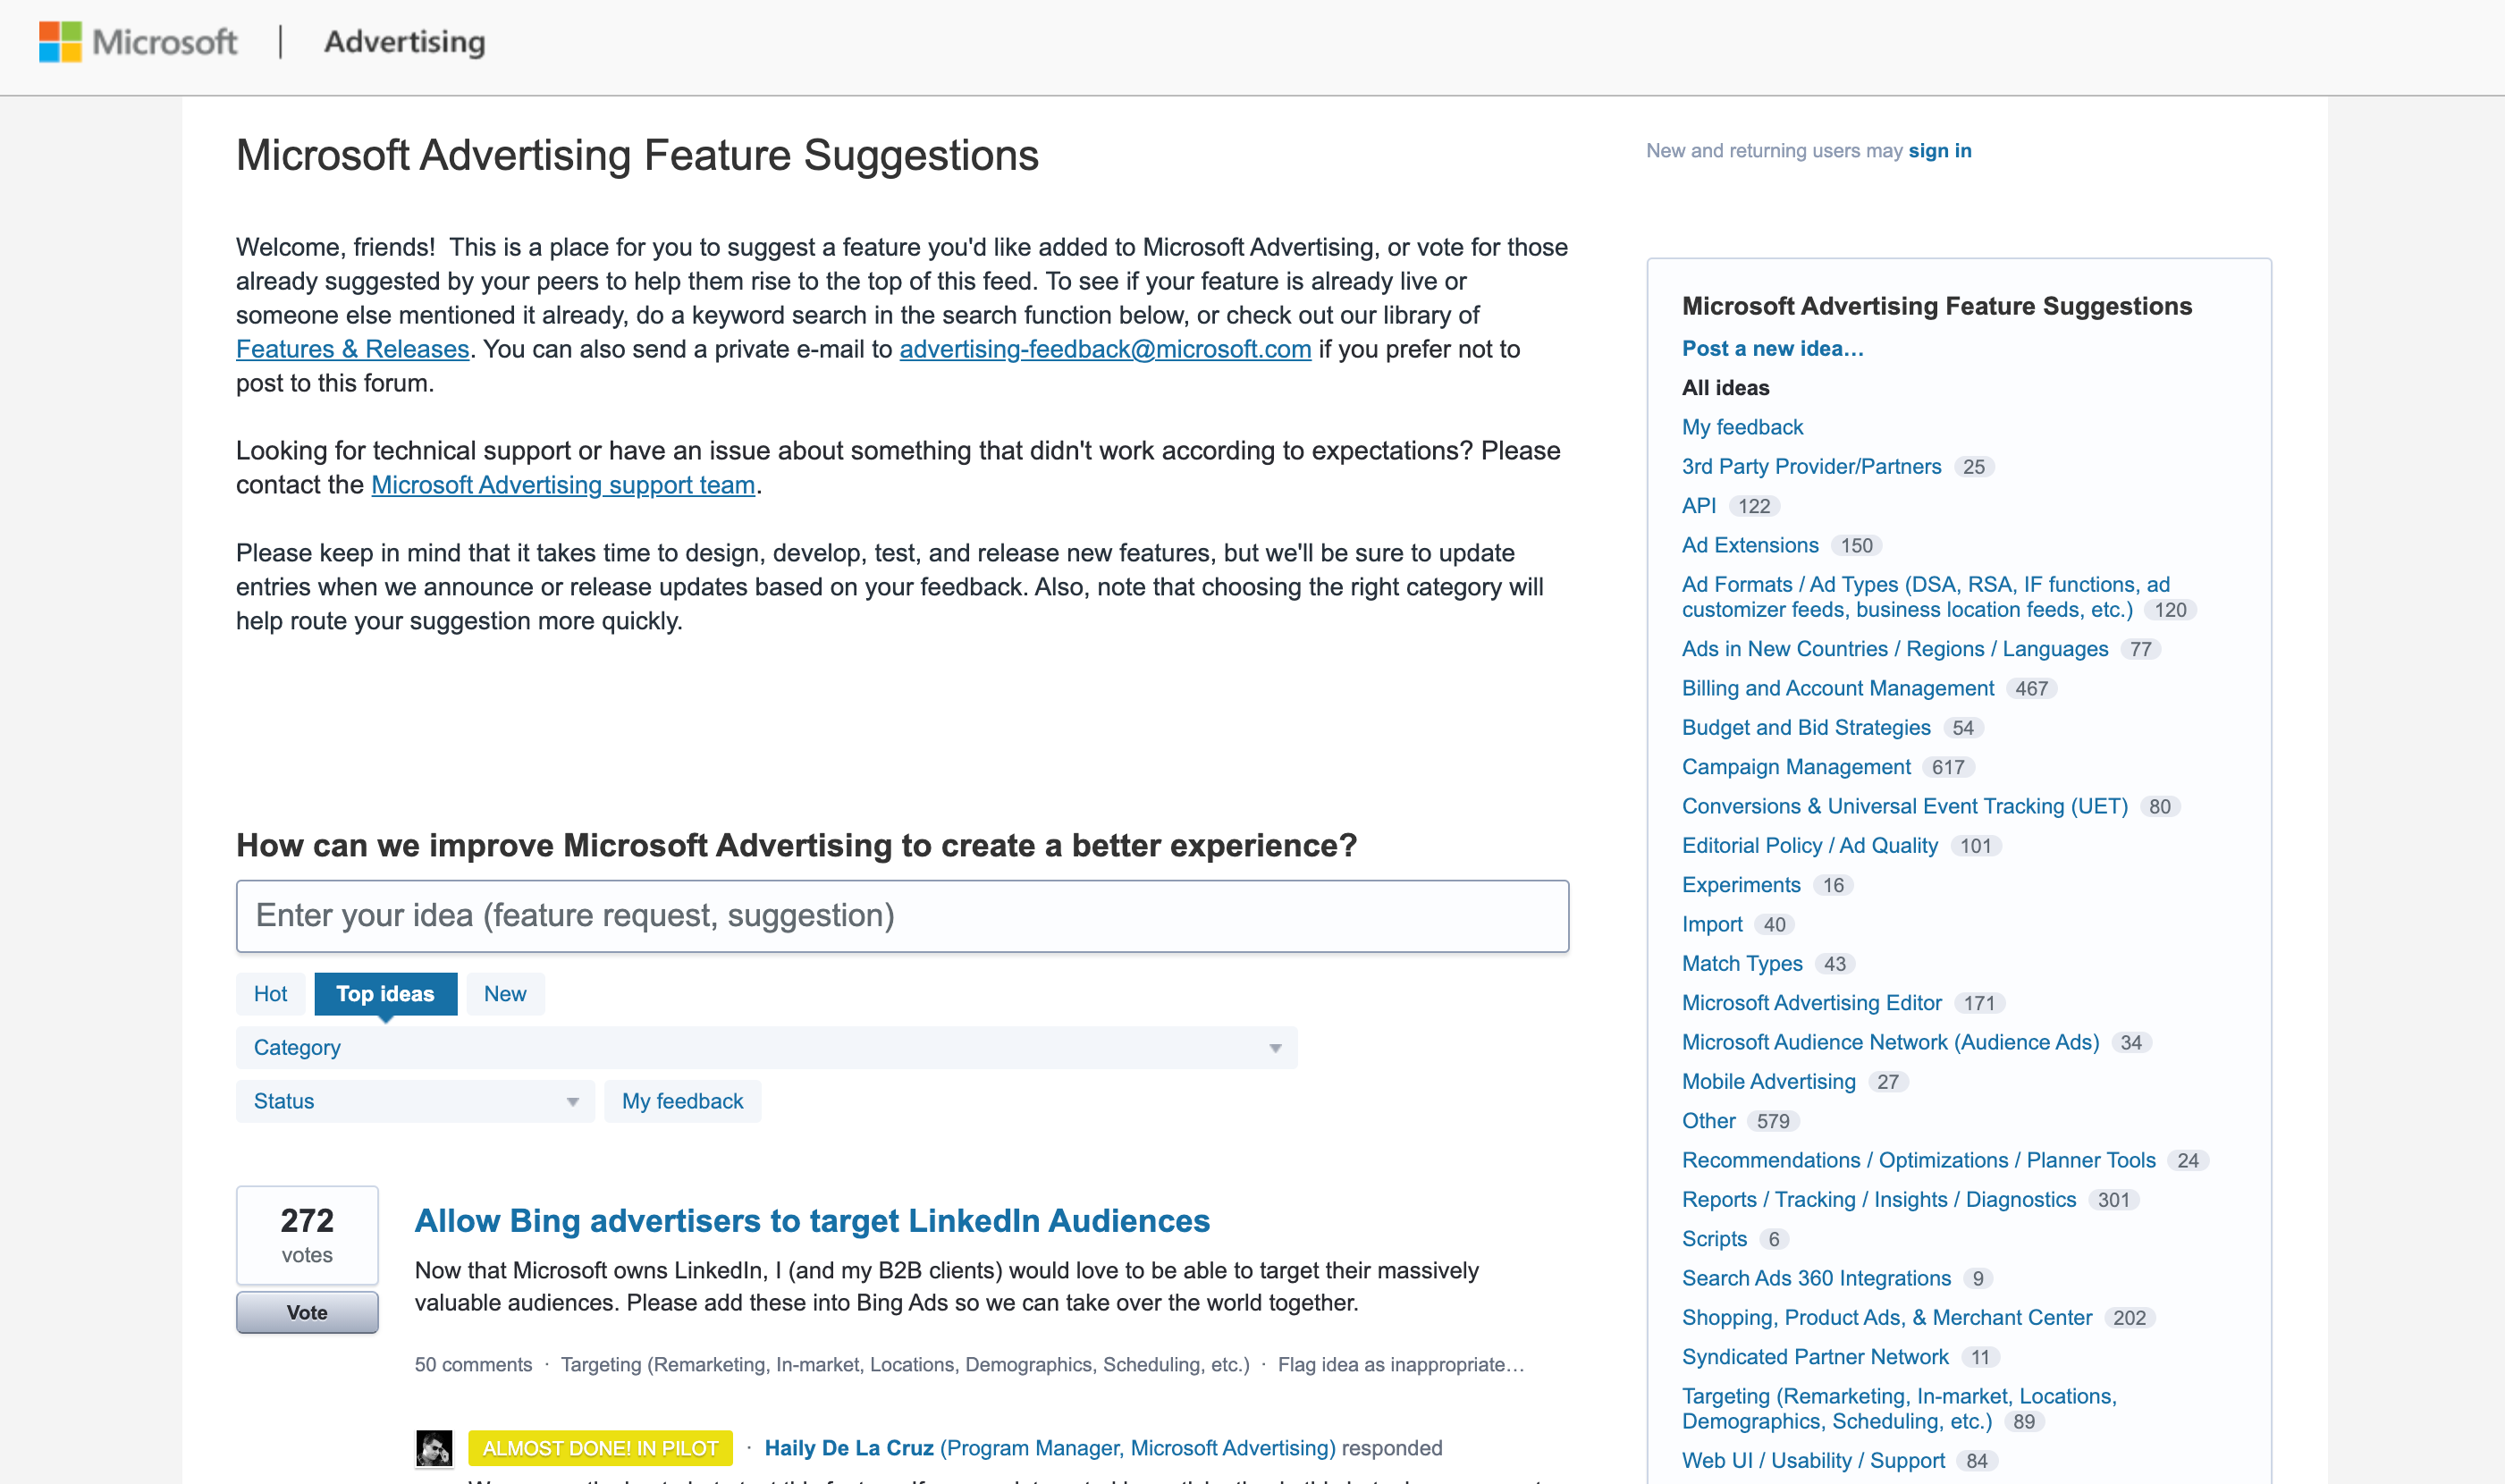 Microsoft-Advertising-Feature-Suggestions-Top-3744-ideas --- Microsoft-Advertising-Feature-Suggestions